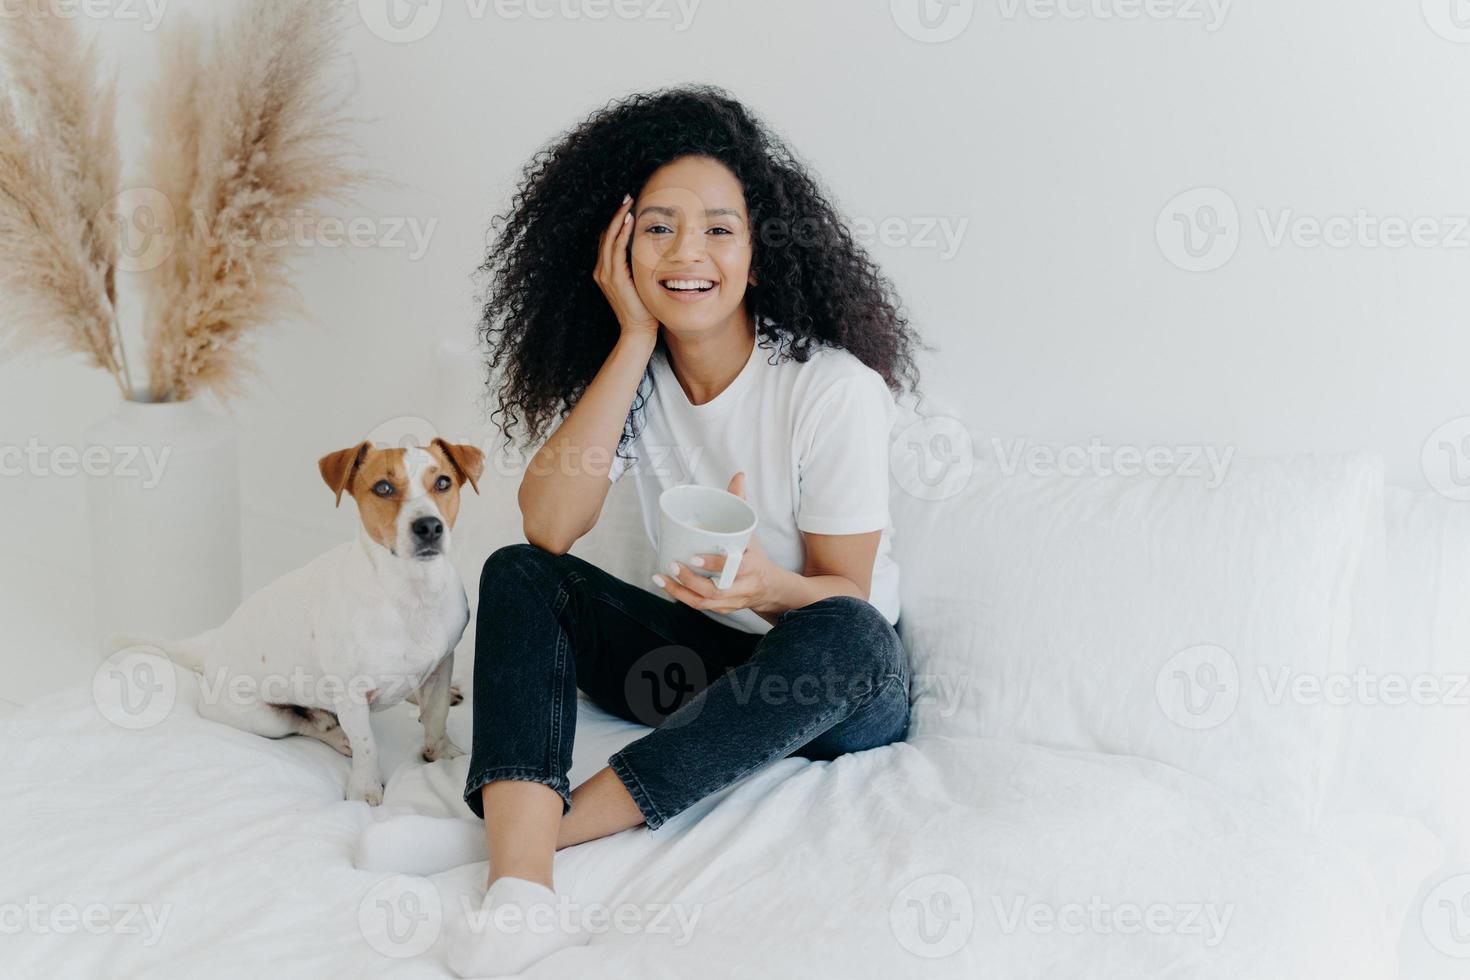 Happy attractive ethnic woman with curly hair wears white t shirt, jeans and socks, smiles pleasantly, drinks tea in comfortable bed, poses with dog, have lazy weekend. People, rest, animals concept photo